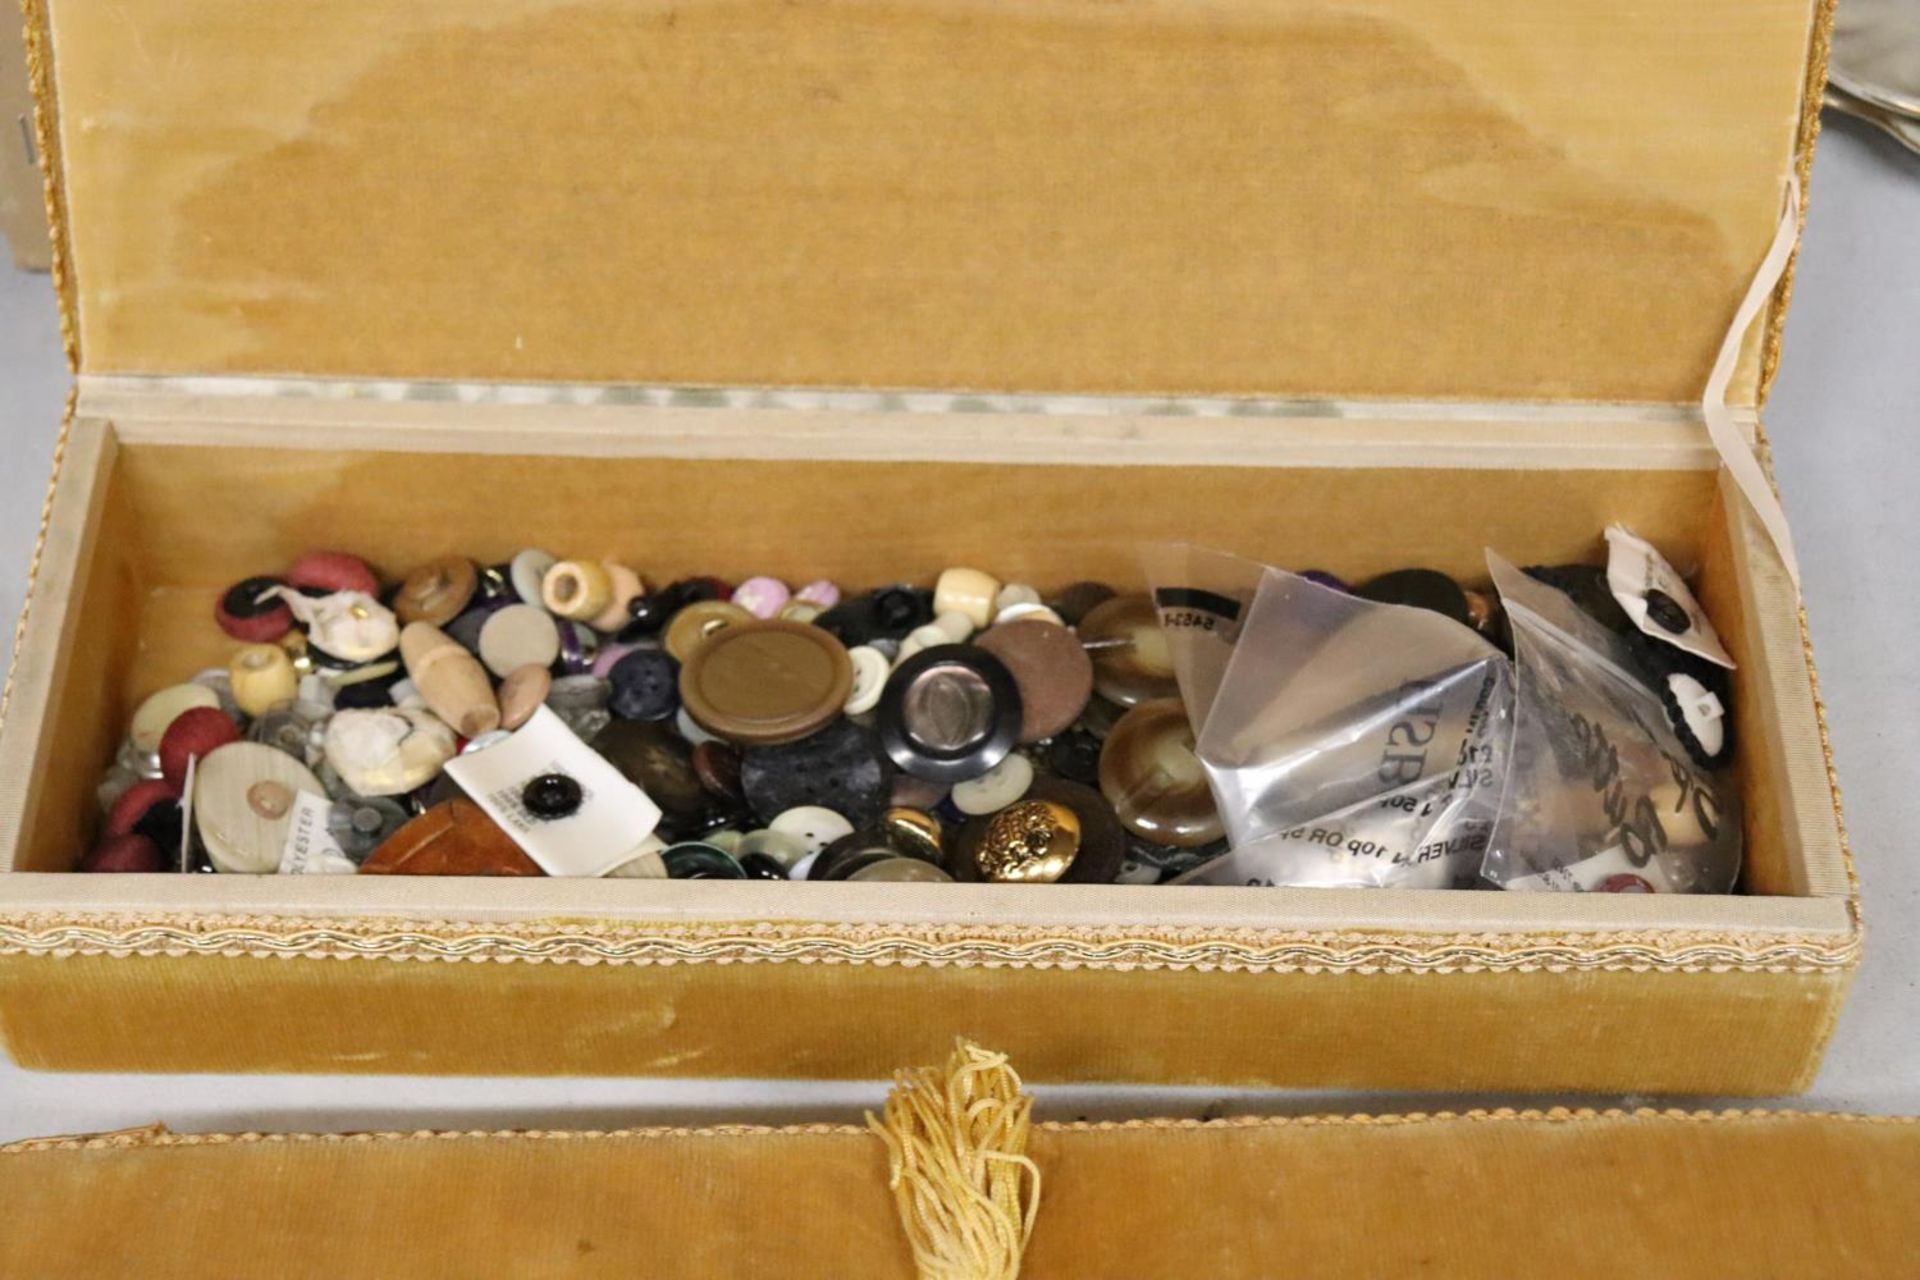 A LARGE QUANTITY OF VINTAGE BUTTONS IN BOXES PLUS HABERDASHERY ITEMS - Image 3 of 5